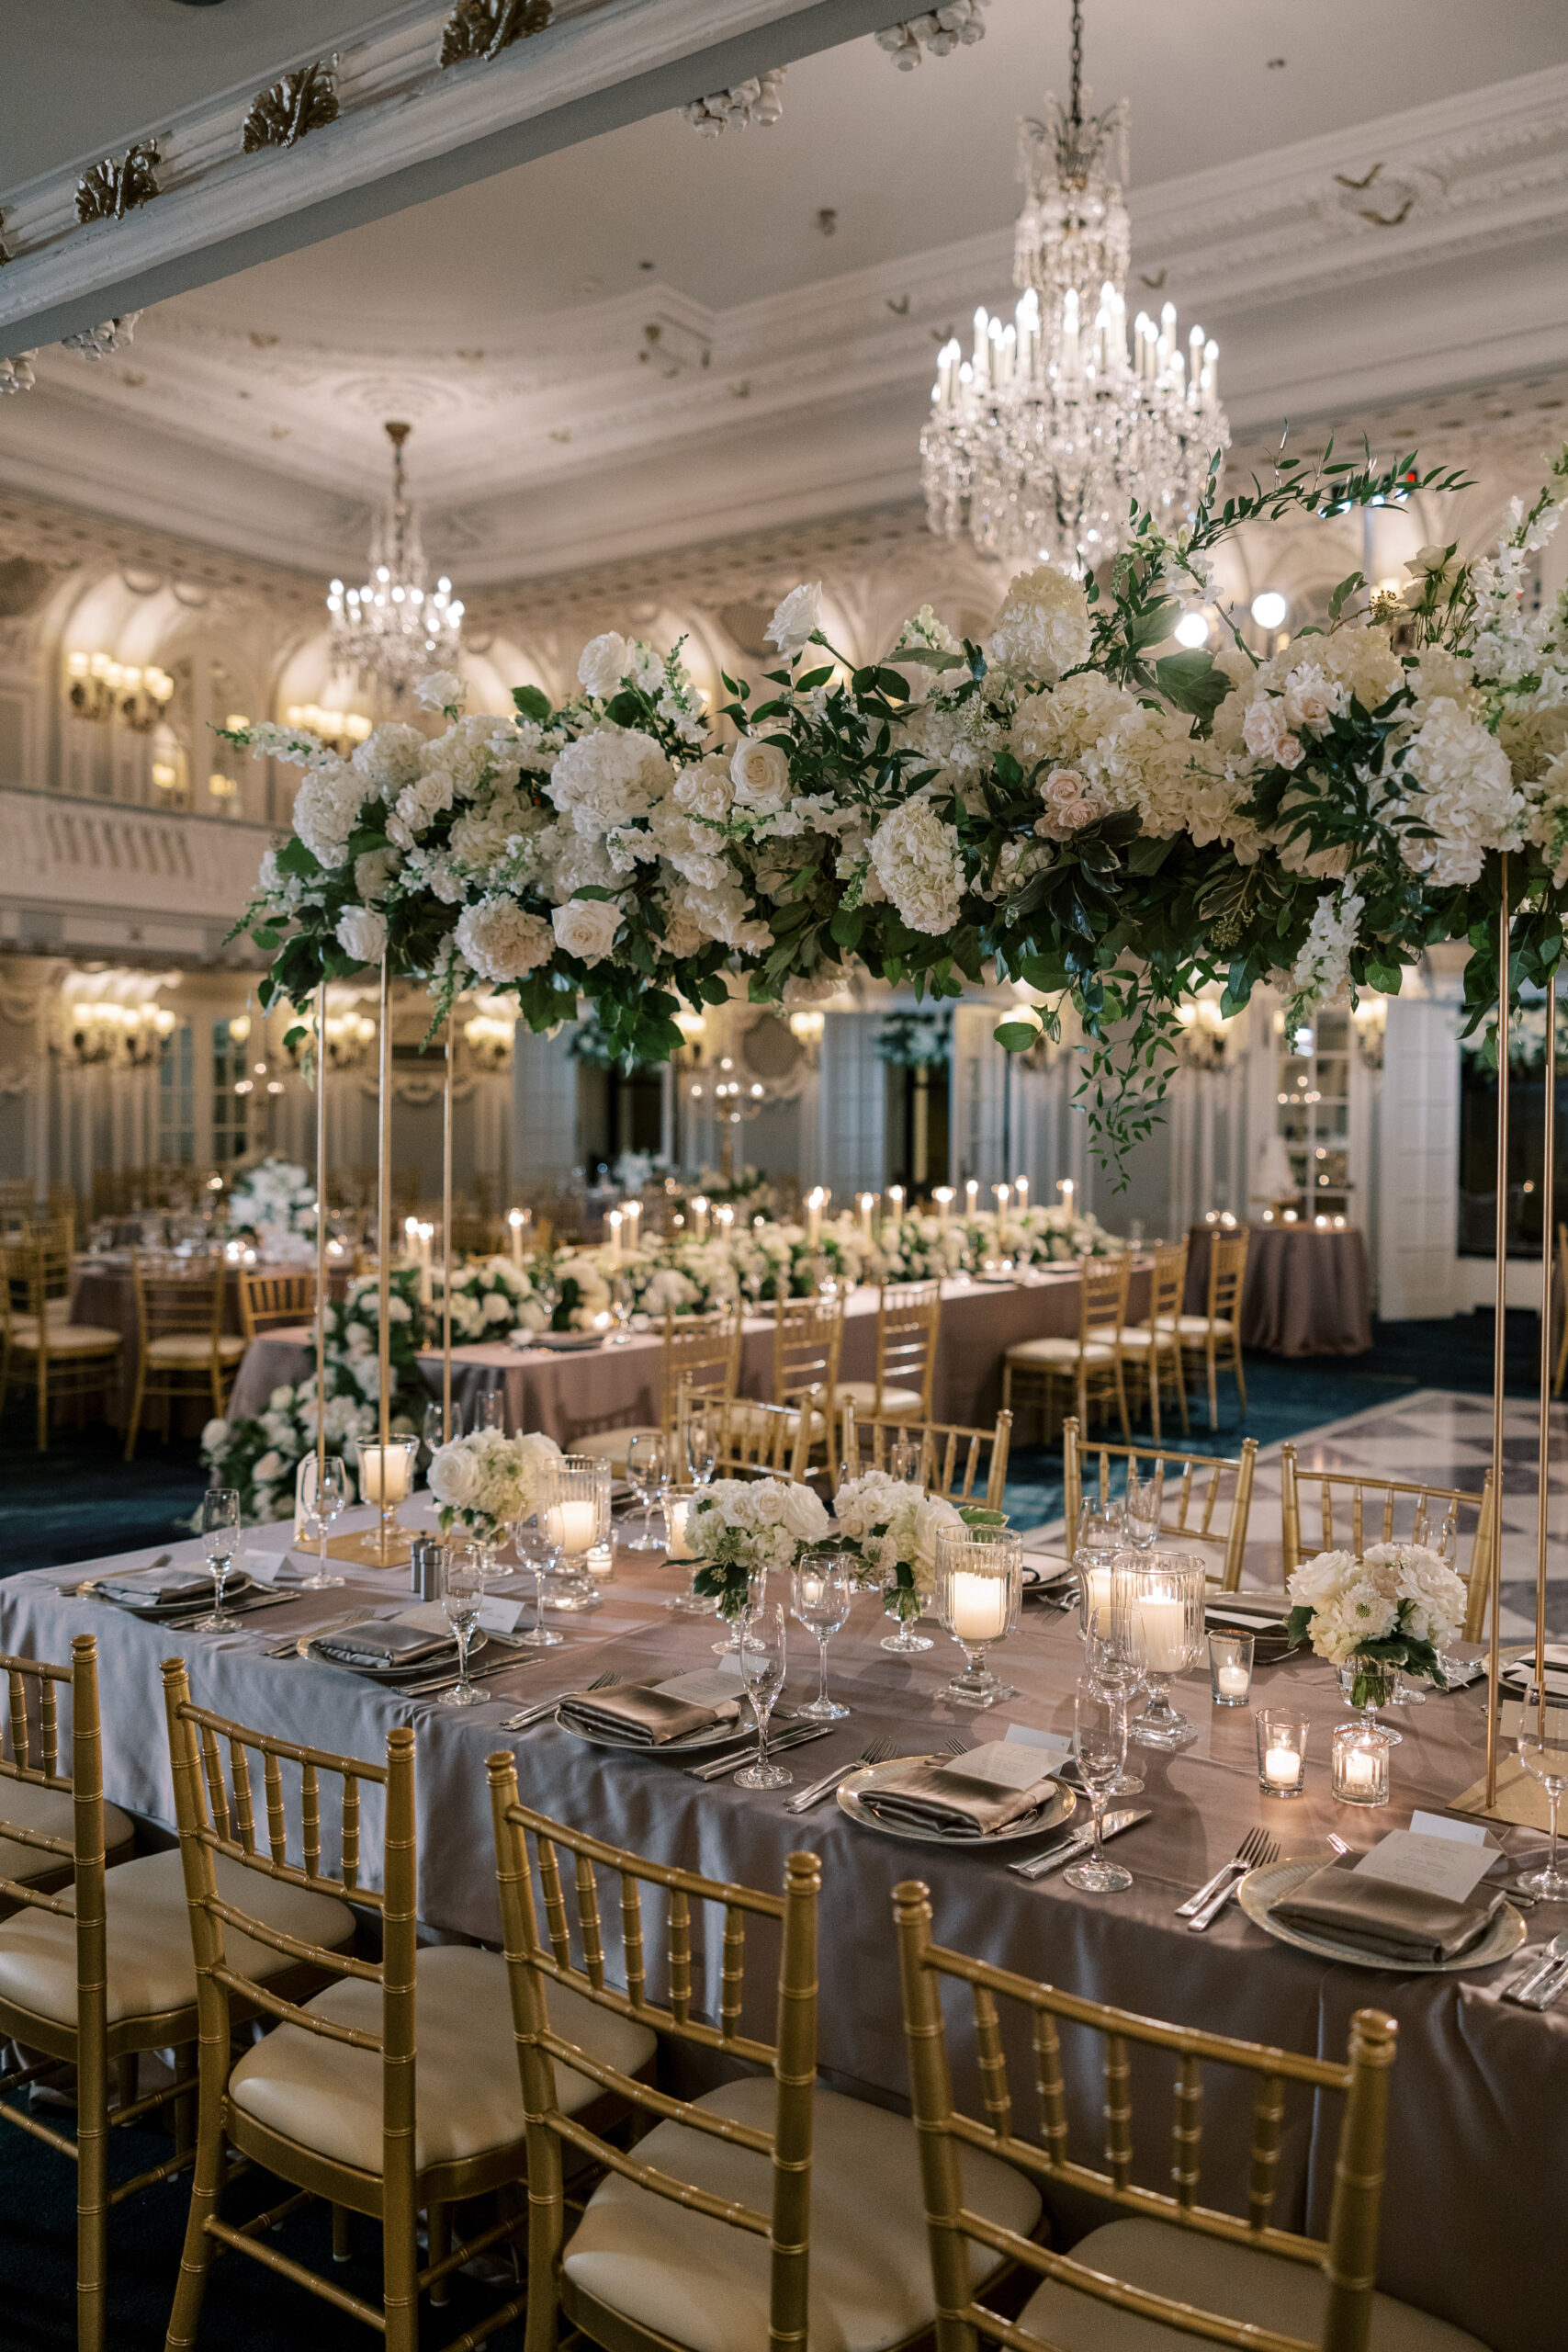 Elegant reception tables with gold chairs, floral centerpieces, and candlelight at the Blackstone Hotel, featuring lush overhead arrangements. Designed by Chicago wedding planner Savoir Fête.